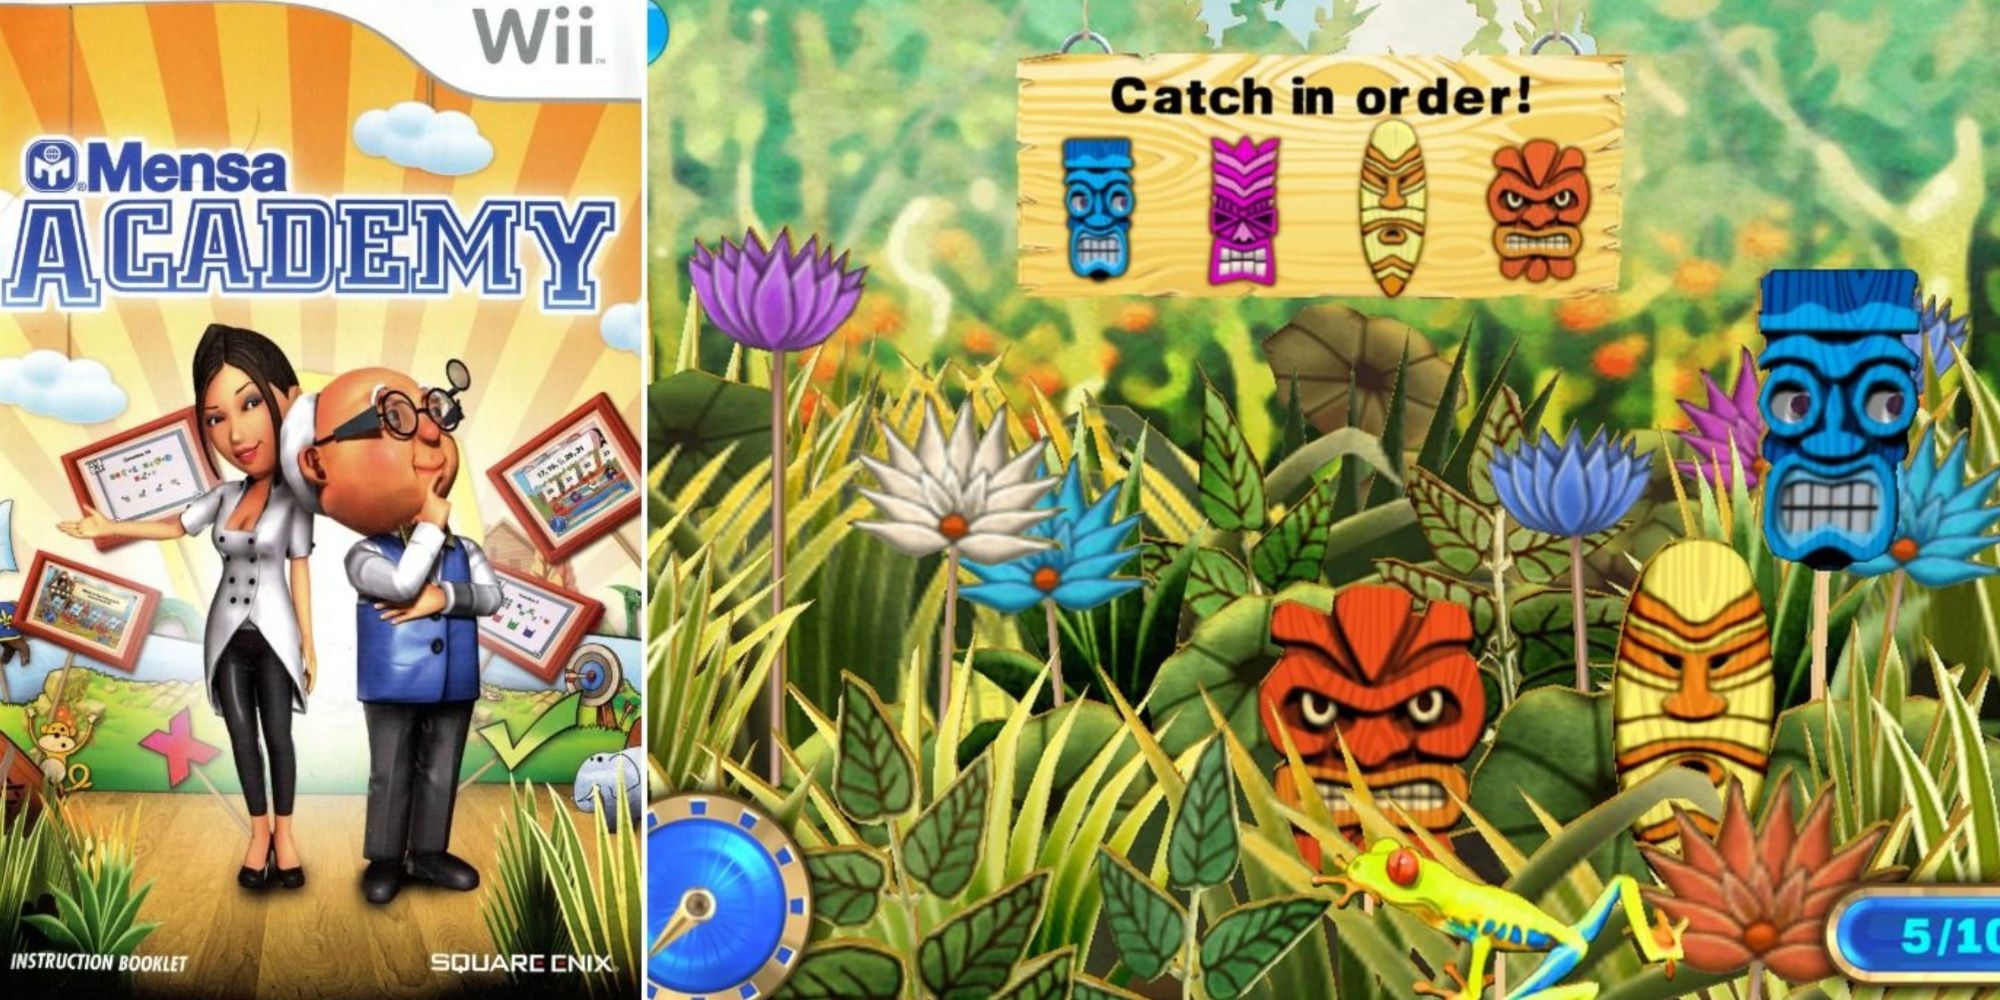 A split-image of the Wii artwork for American Mensa Academy and gameplay of a minigame where you catch items in a specific order.